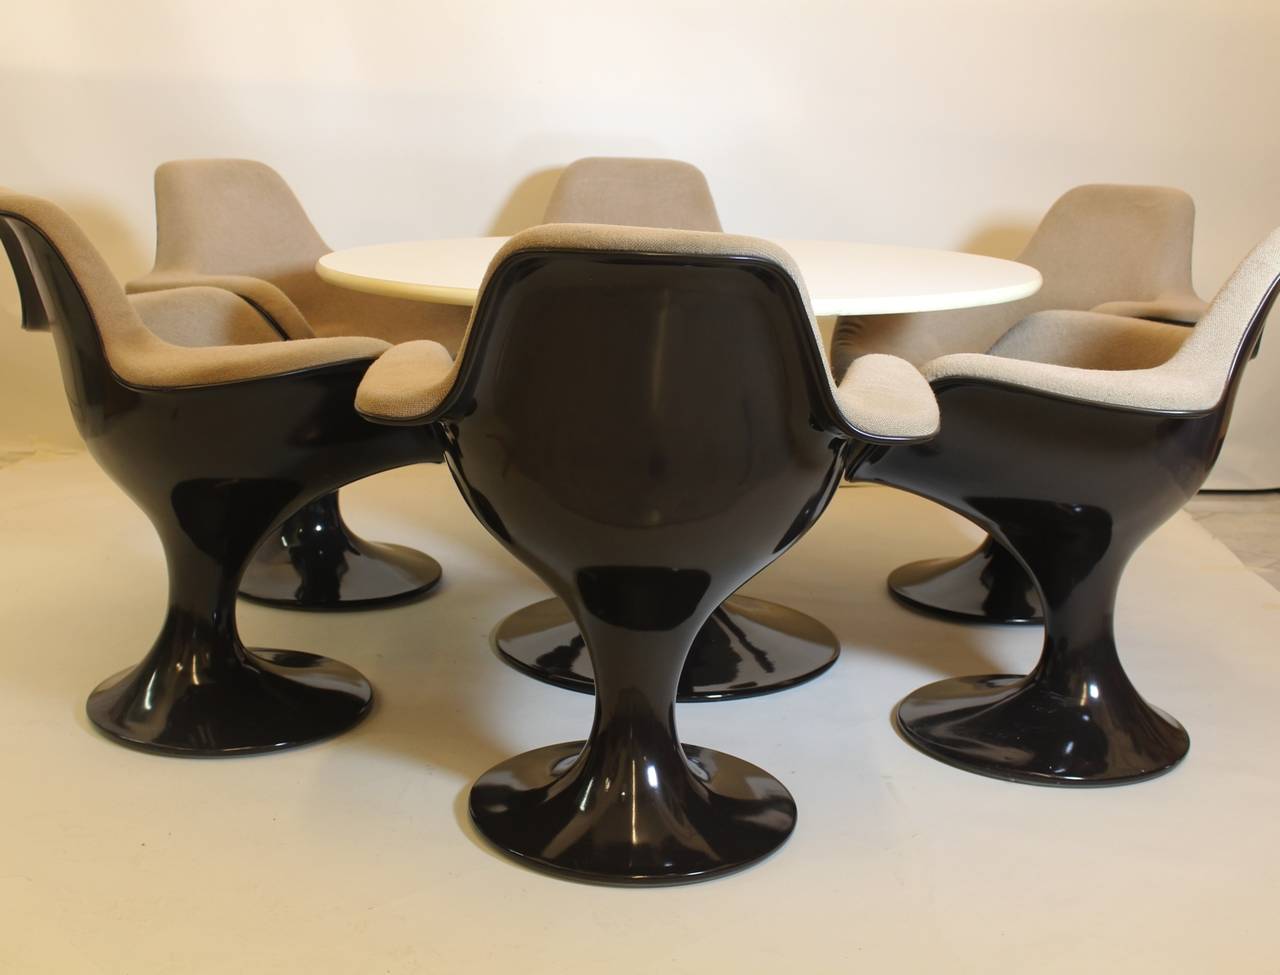 A space age dining room set model Orbit, which was designed by Markus Farner and Walter Grunder circa 1970 USA.
Very rare to find a set of 6 dining chairs and 1 dining table, designed by Markus Farner & Walter Grunder, circa 1970 and produced by